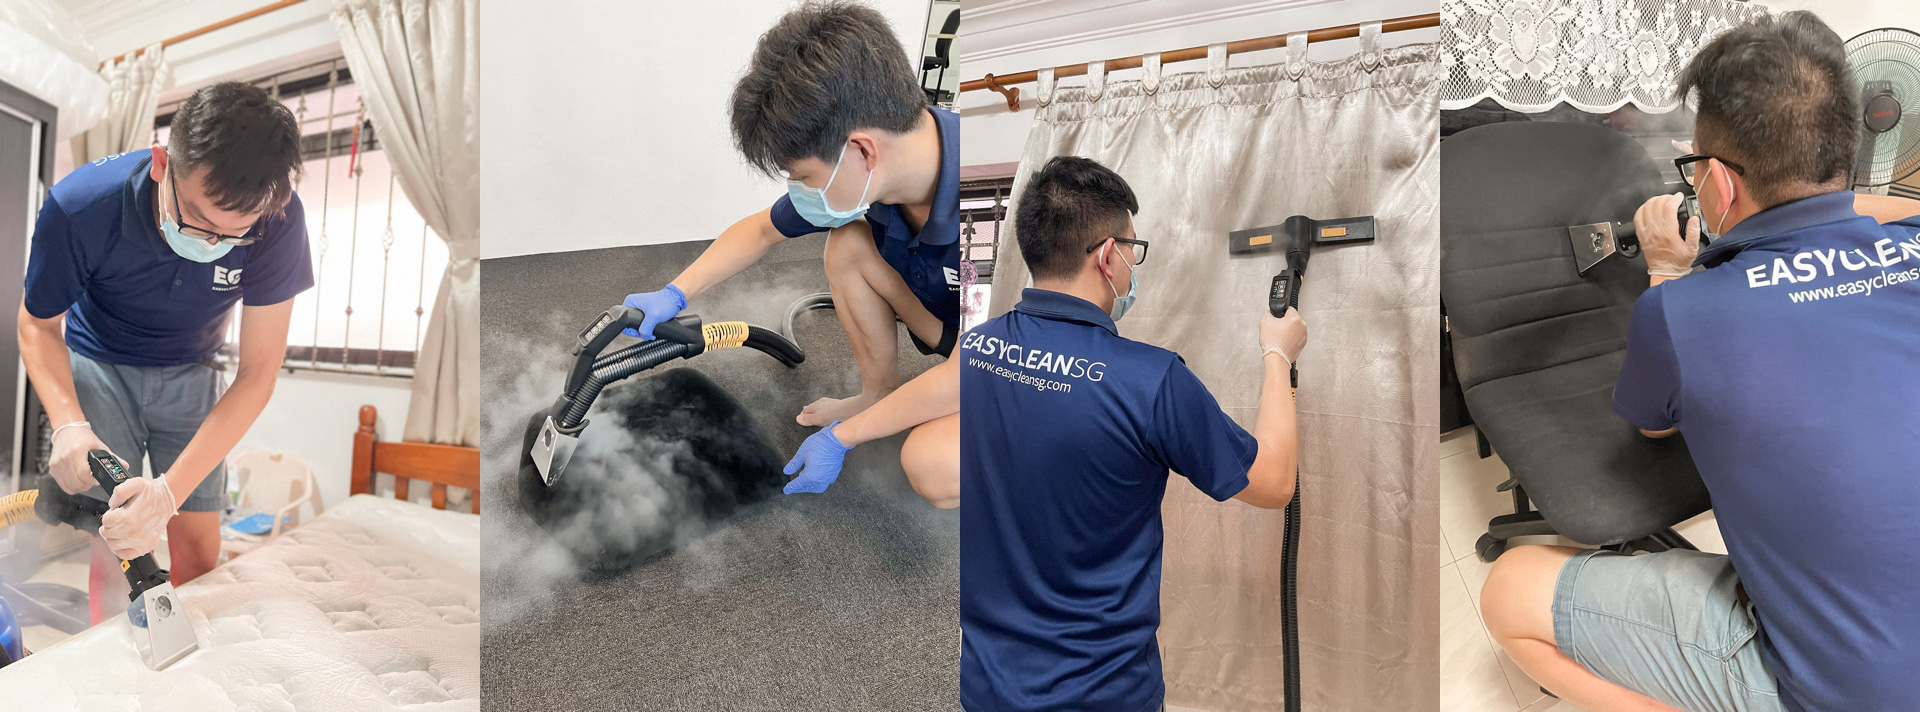 https://www.easycleansg.com/pages/upholstery-steam-cleaning